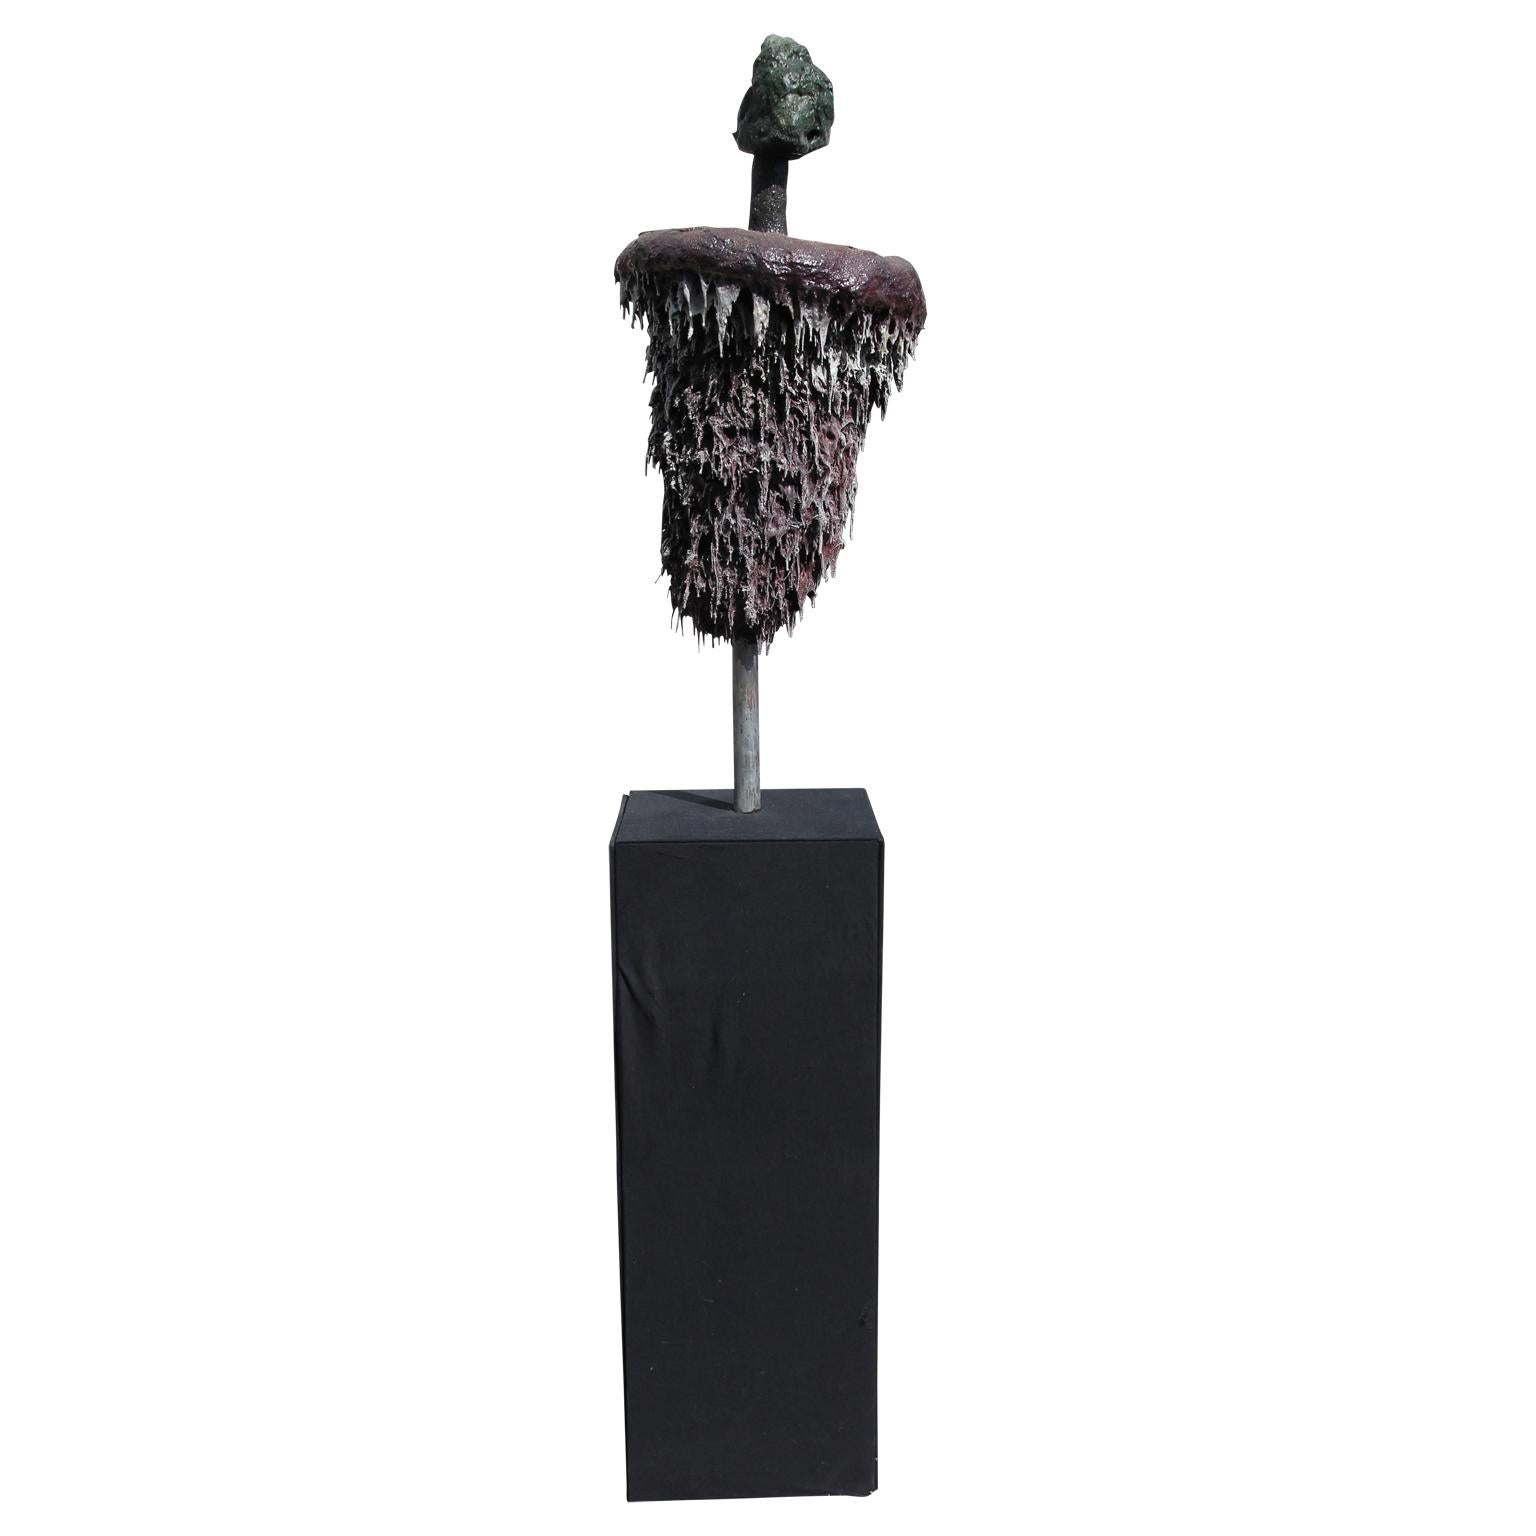 Brutalist avant-garde sculpture by artist Patrick McSwain. Three-piece sculpture consisting of a small green toned rock shaped object on a steel tube that goes through a red toned, round, and rough abstracted form that tapers. Sculpture sits on a